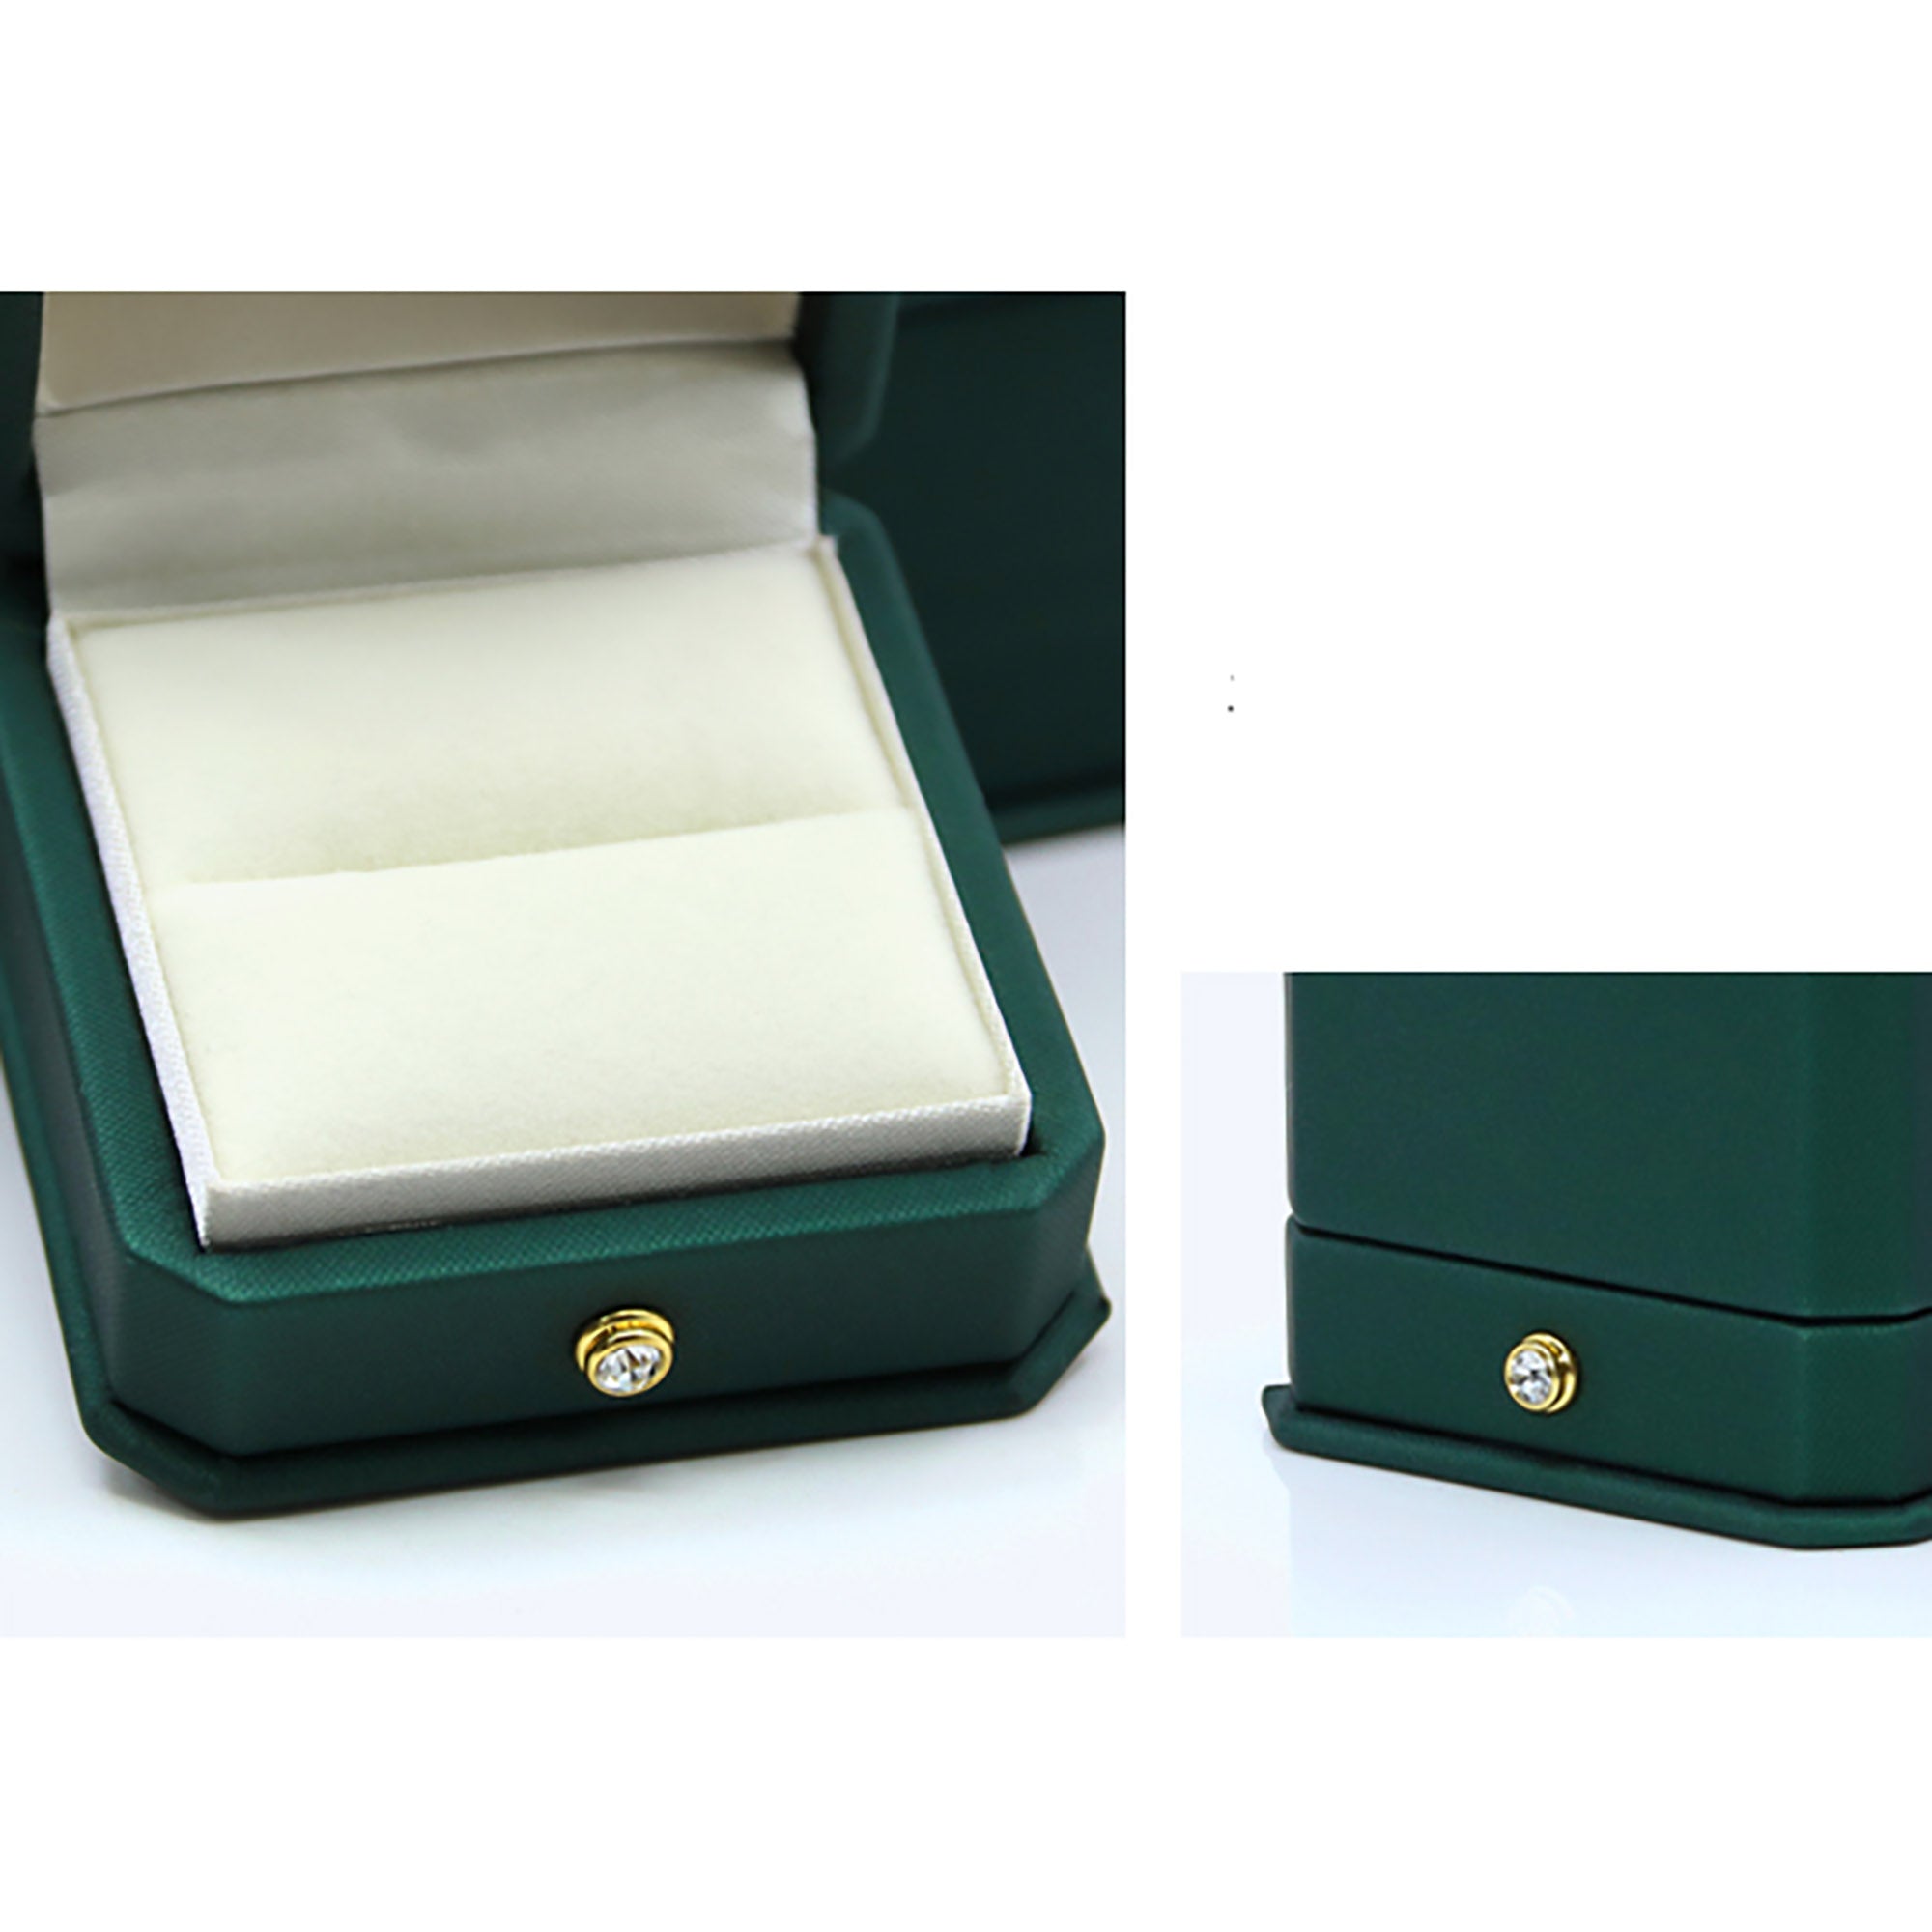 Green Single Ring Jewelry Box / Gift Box Vintage Gift Home Deco Decoration Design